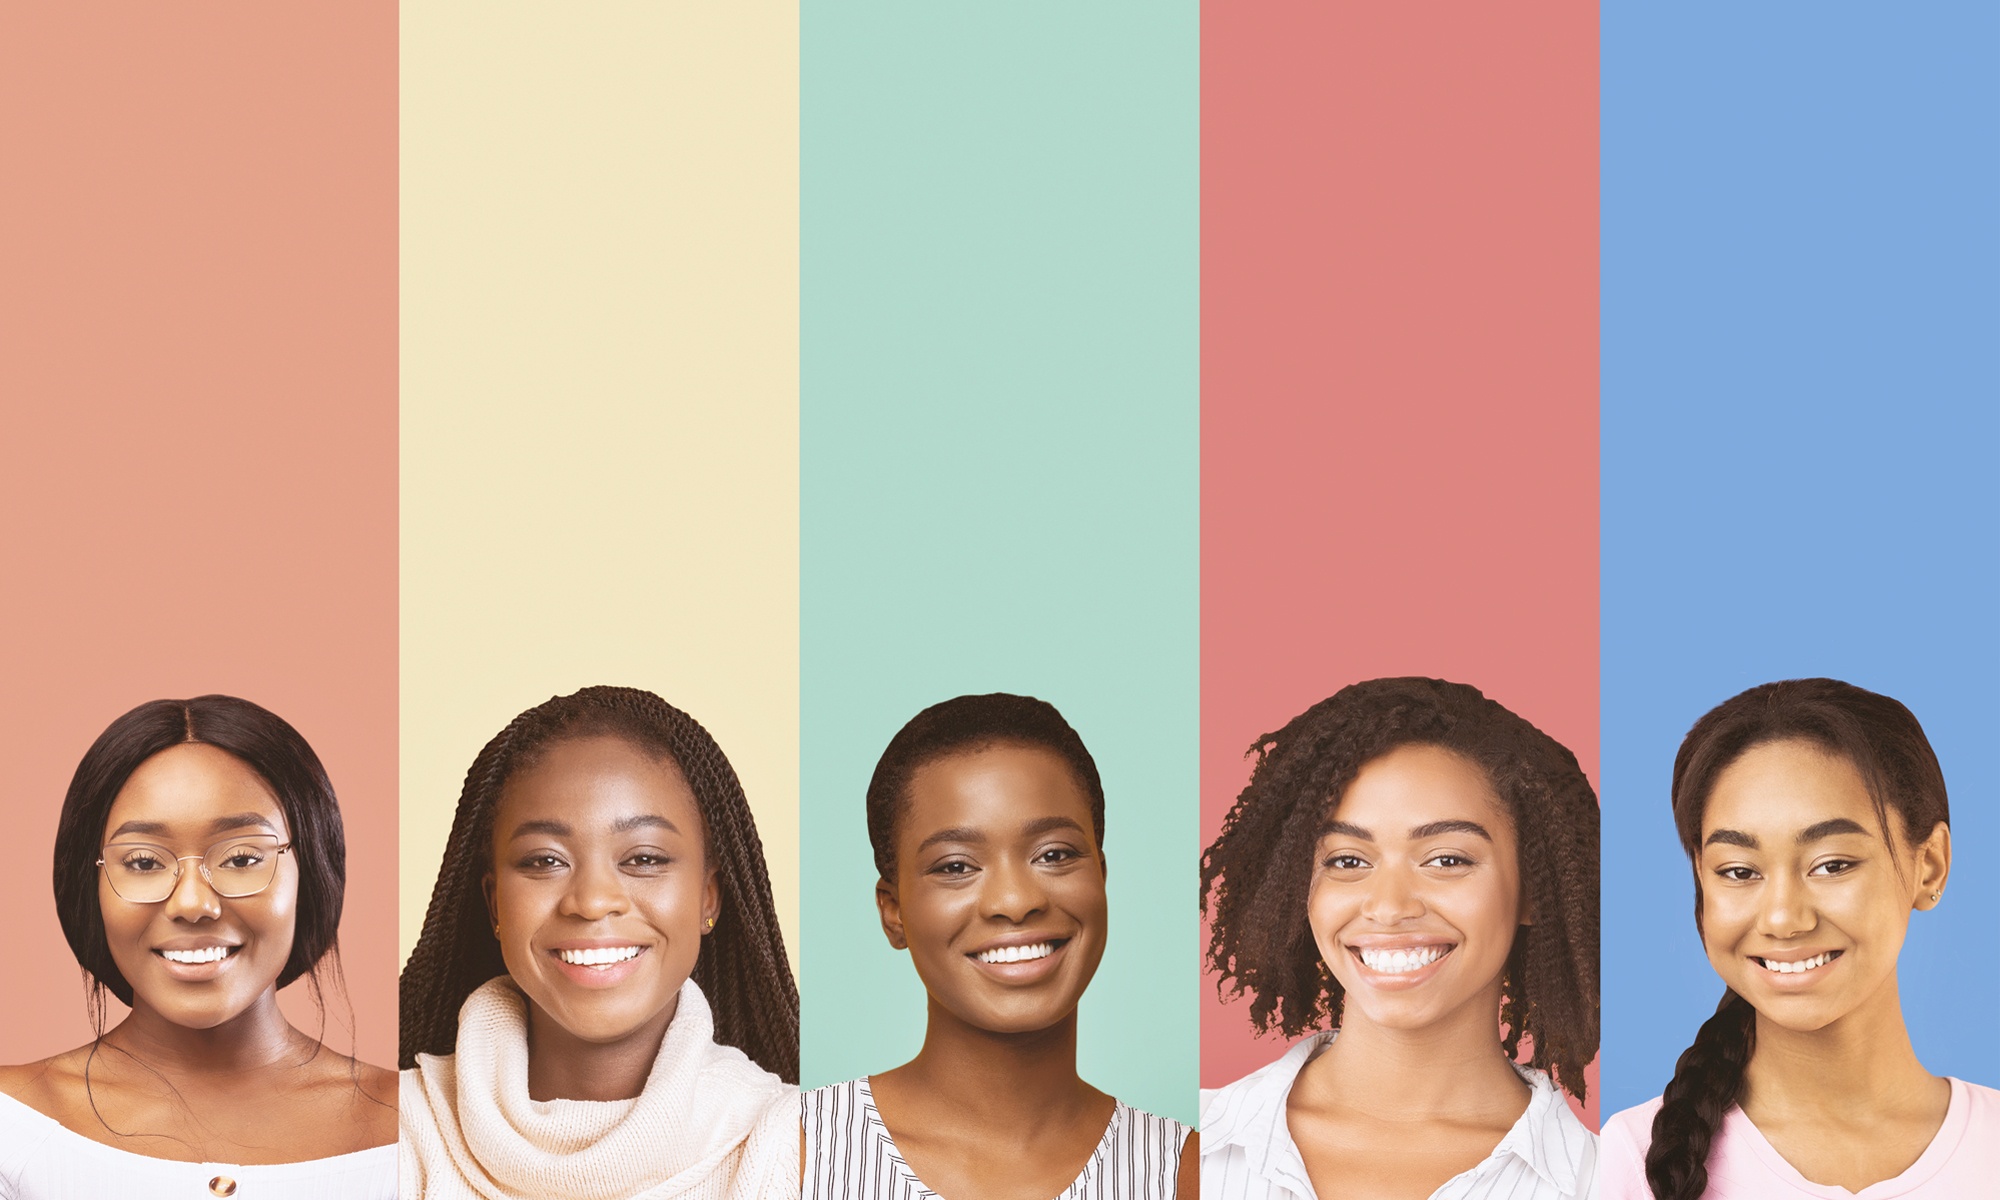 Five smiling young Black women representing the demographic targeted by The MGAM Scholarship Foundation, The MGAM Scholarship Foundation is a 501(c)(3) non-profit organization dedicated to supporting cis and transgender Black female students in their educational pursuits.